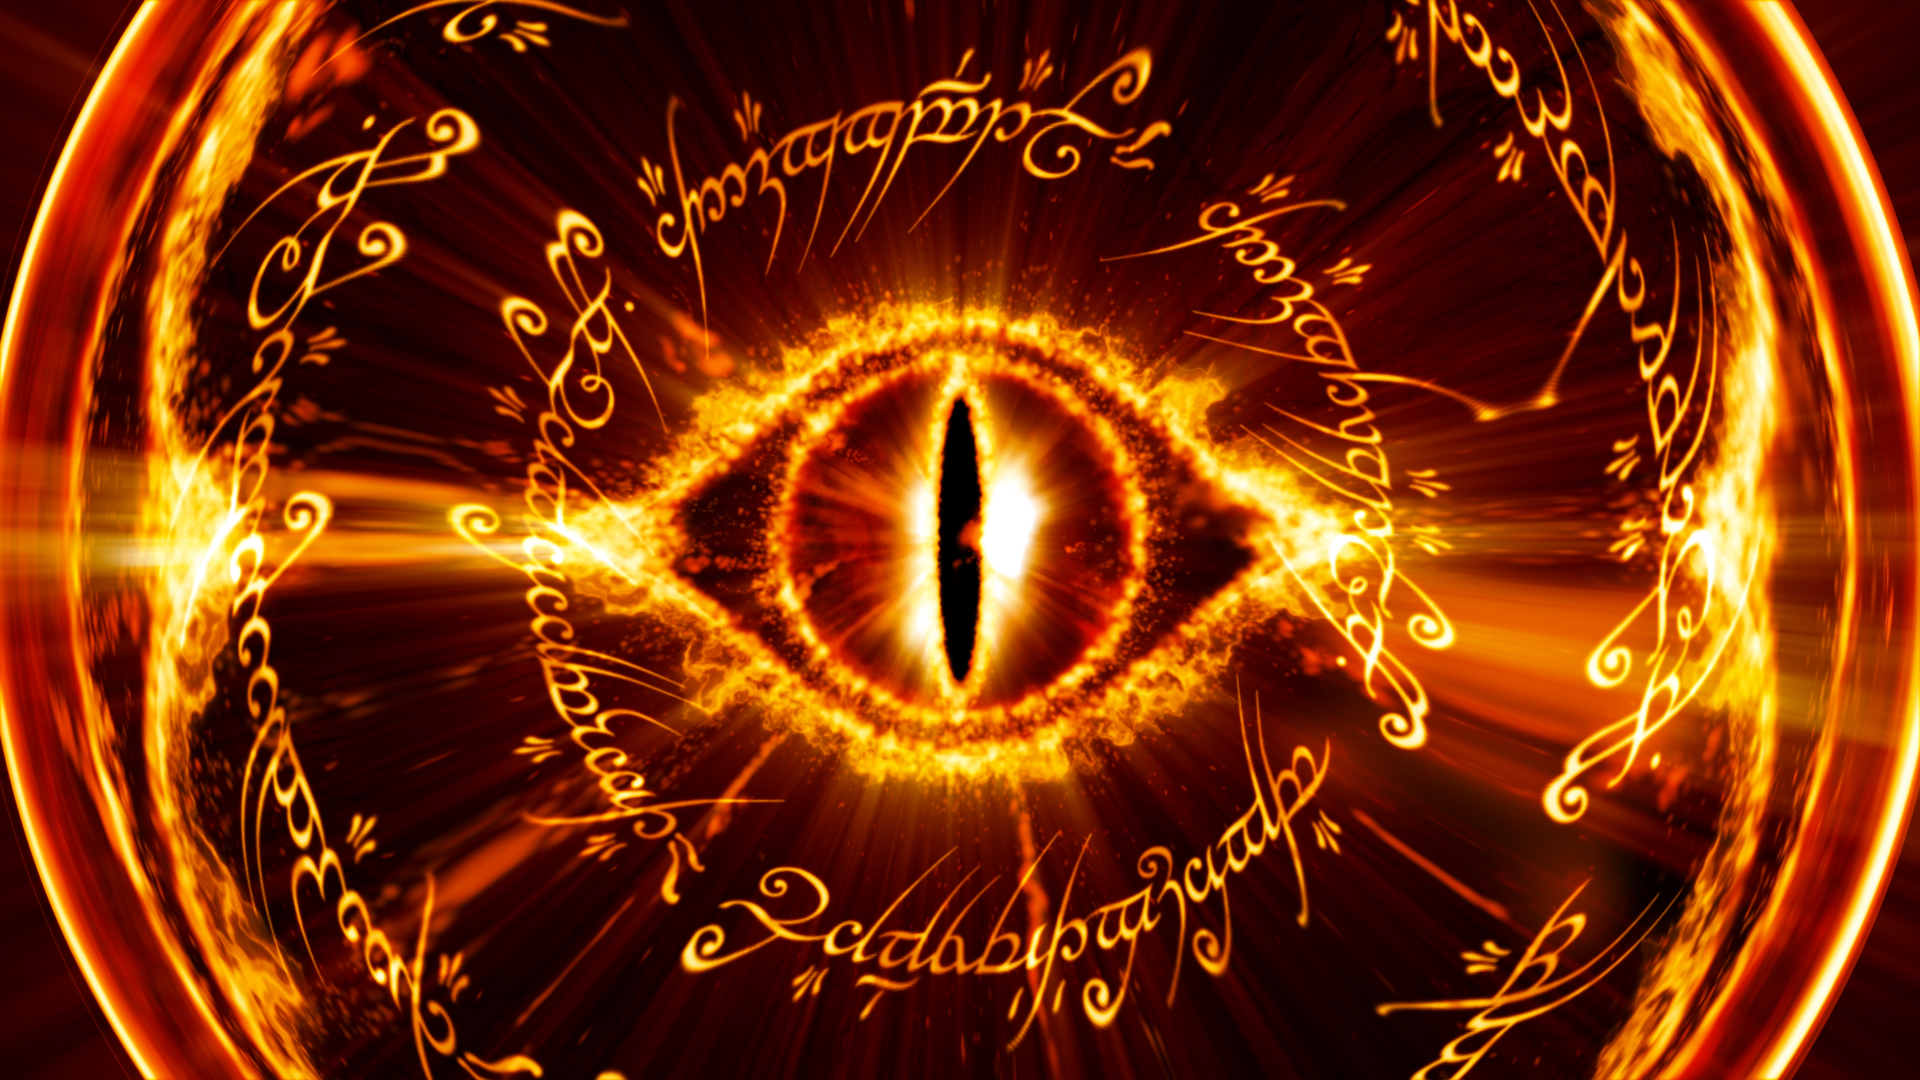 the_eye_of_sauron_by_stirzocular-d86f0oo